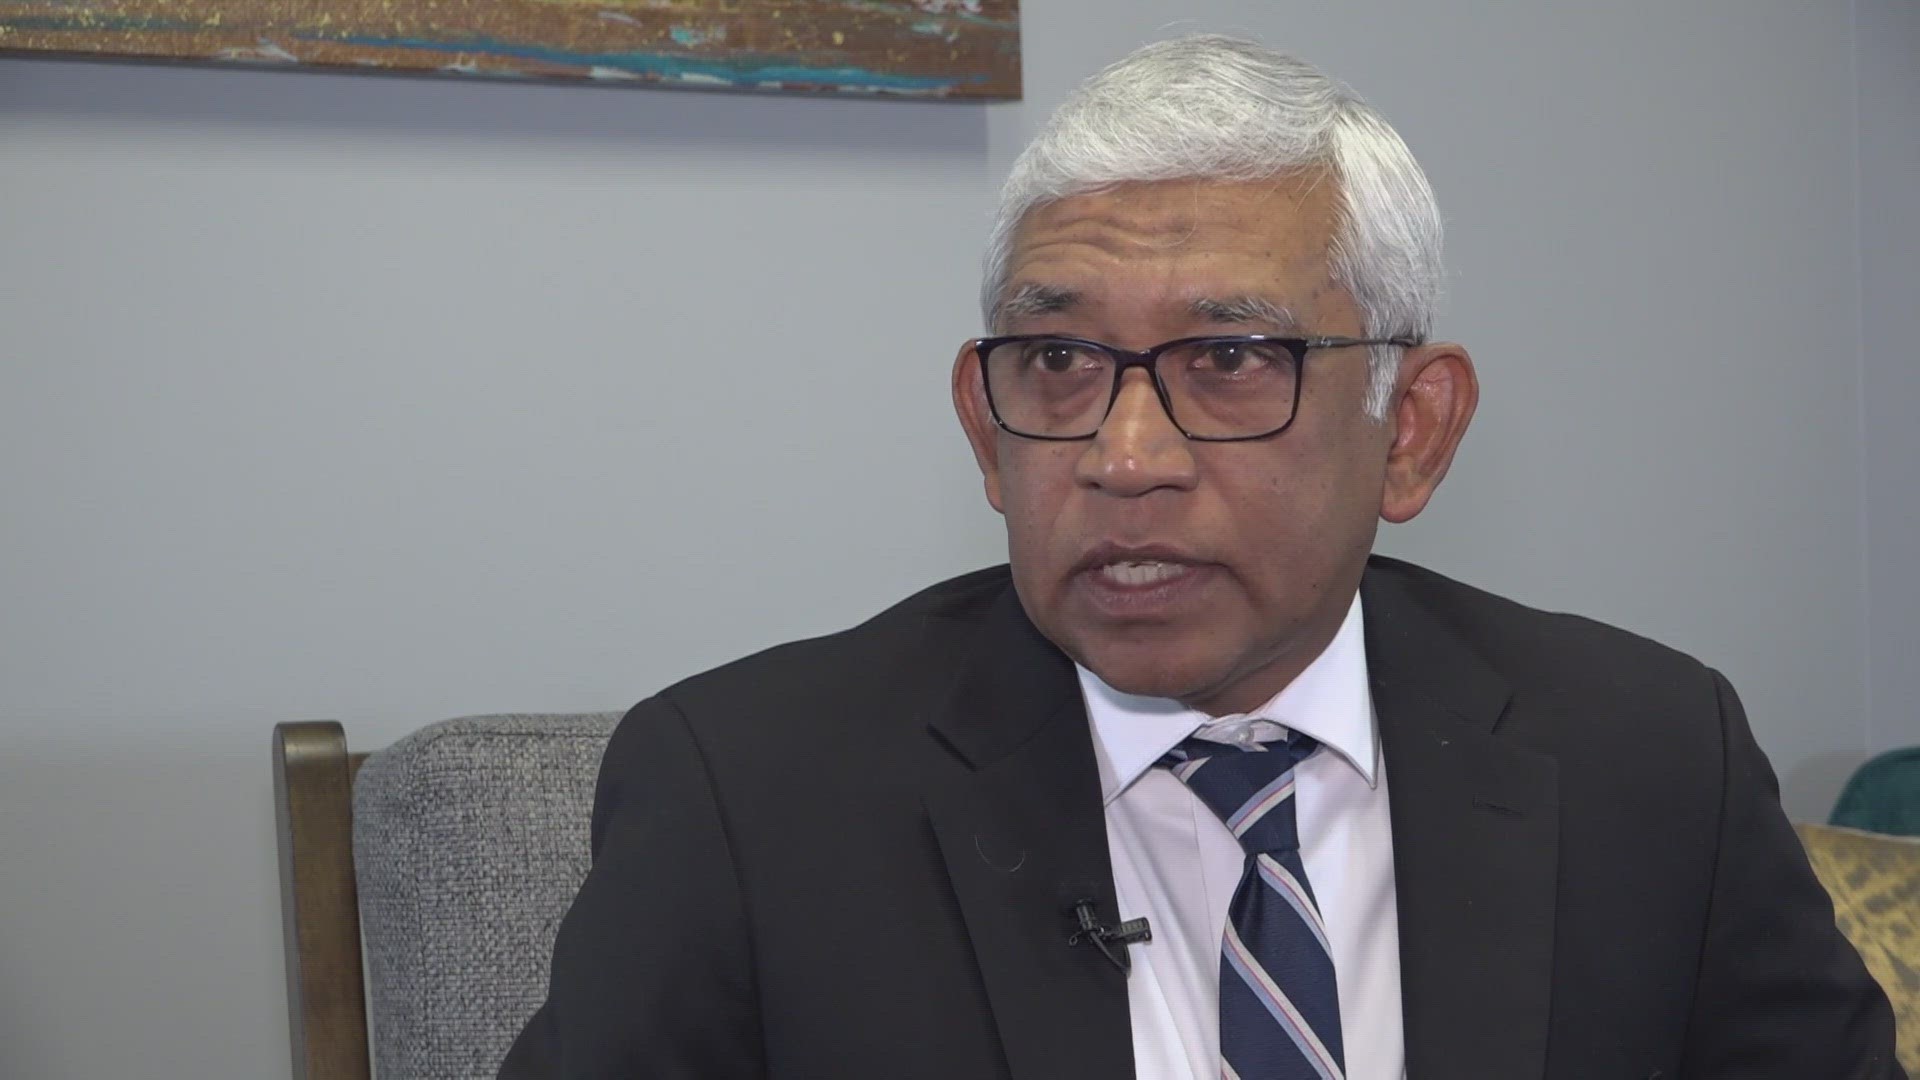 First Coast News sits down with Dr Parvez Ahmed, the city of Jacksonville's Chief of Diversity and Inclusion as the community heals from racist mass shooting.